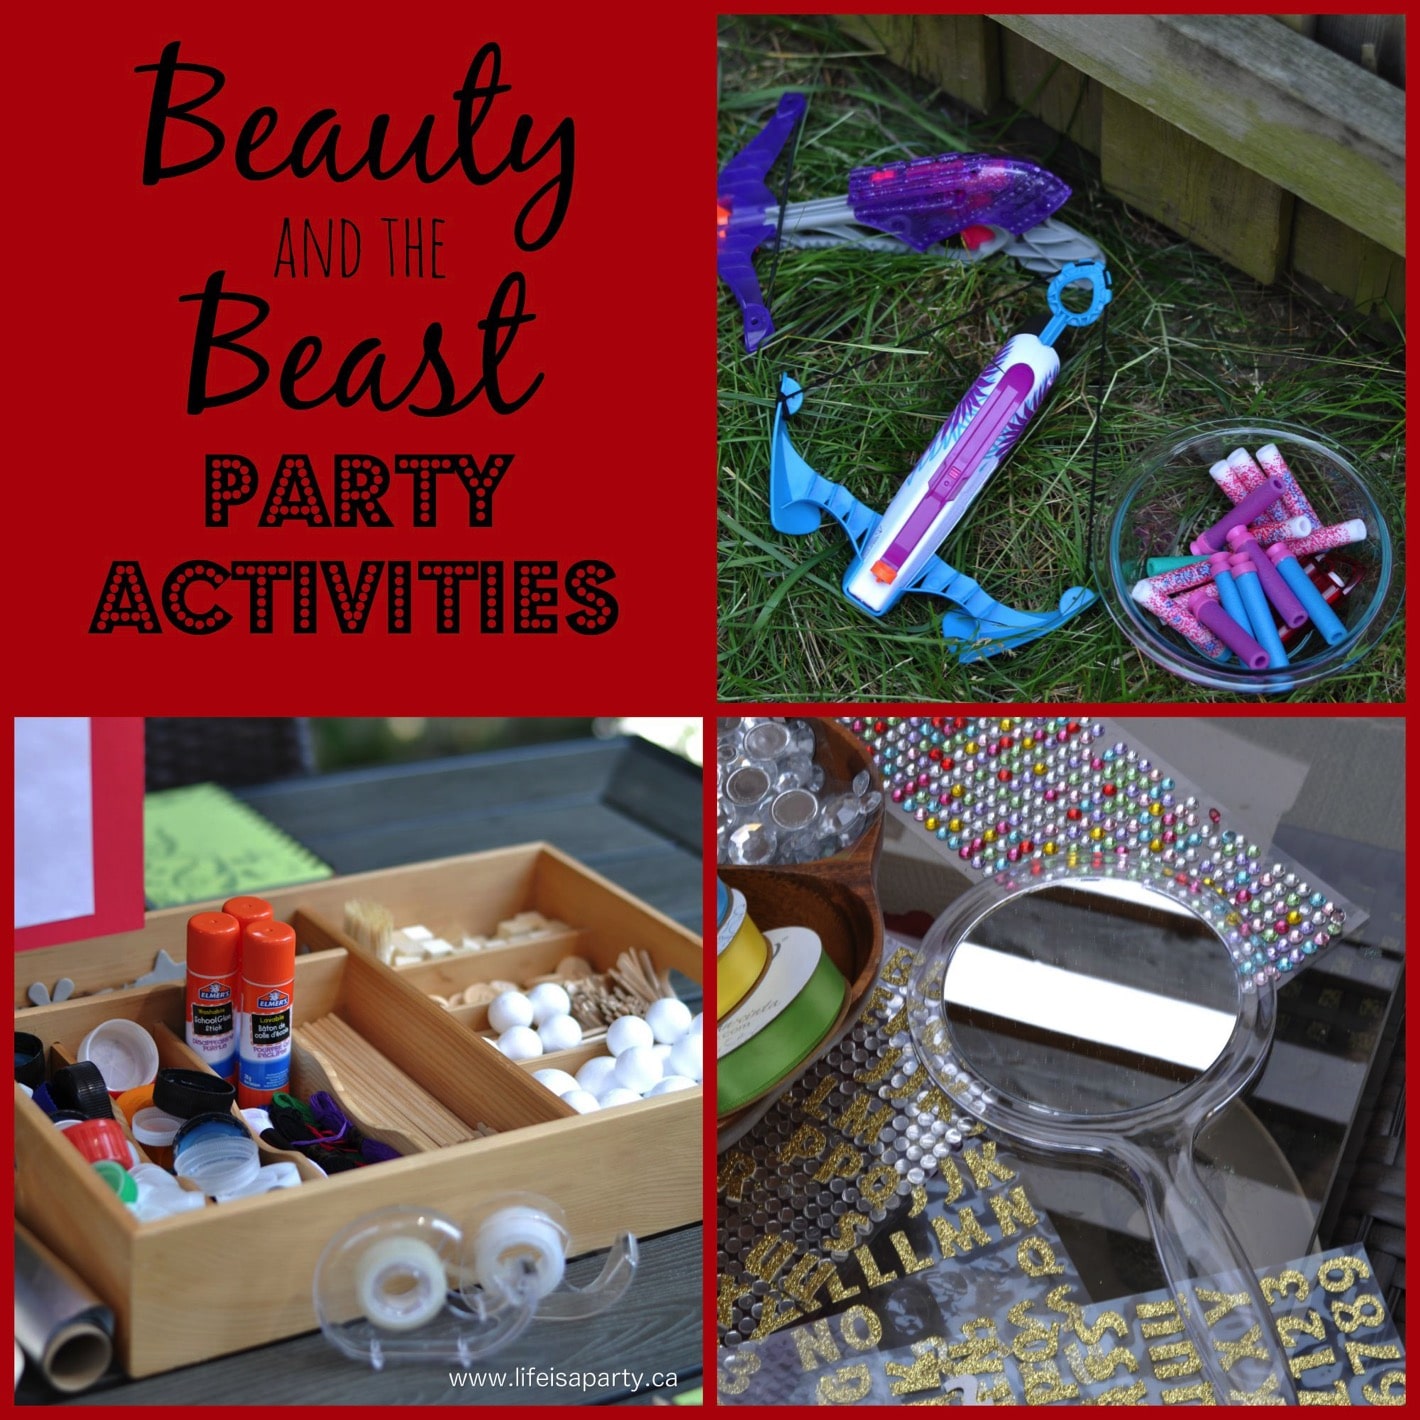 Beauty and the Beast Party -Part II “The Games and Activities”